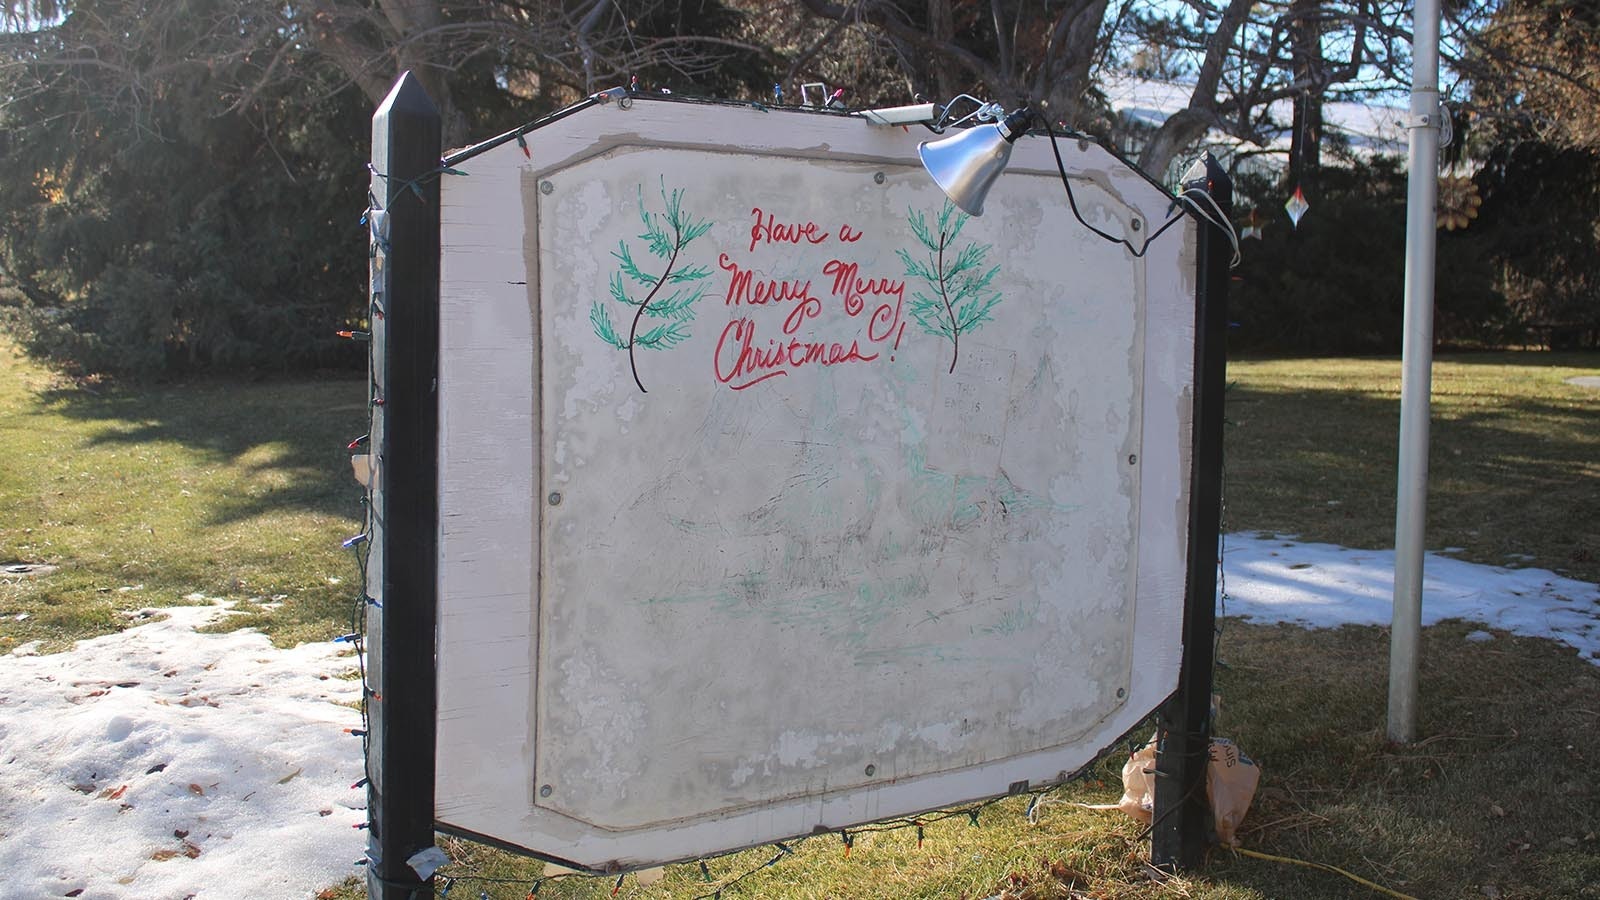 The holiday spirit is everywhere in Lusk, Wyoming.